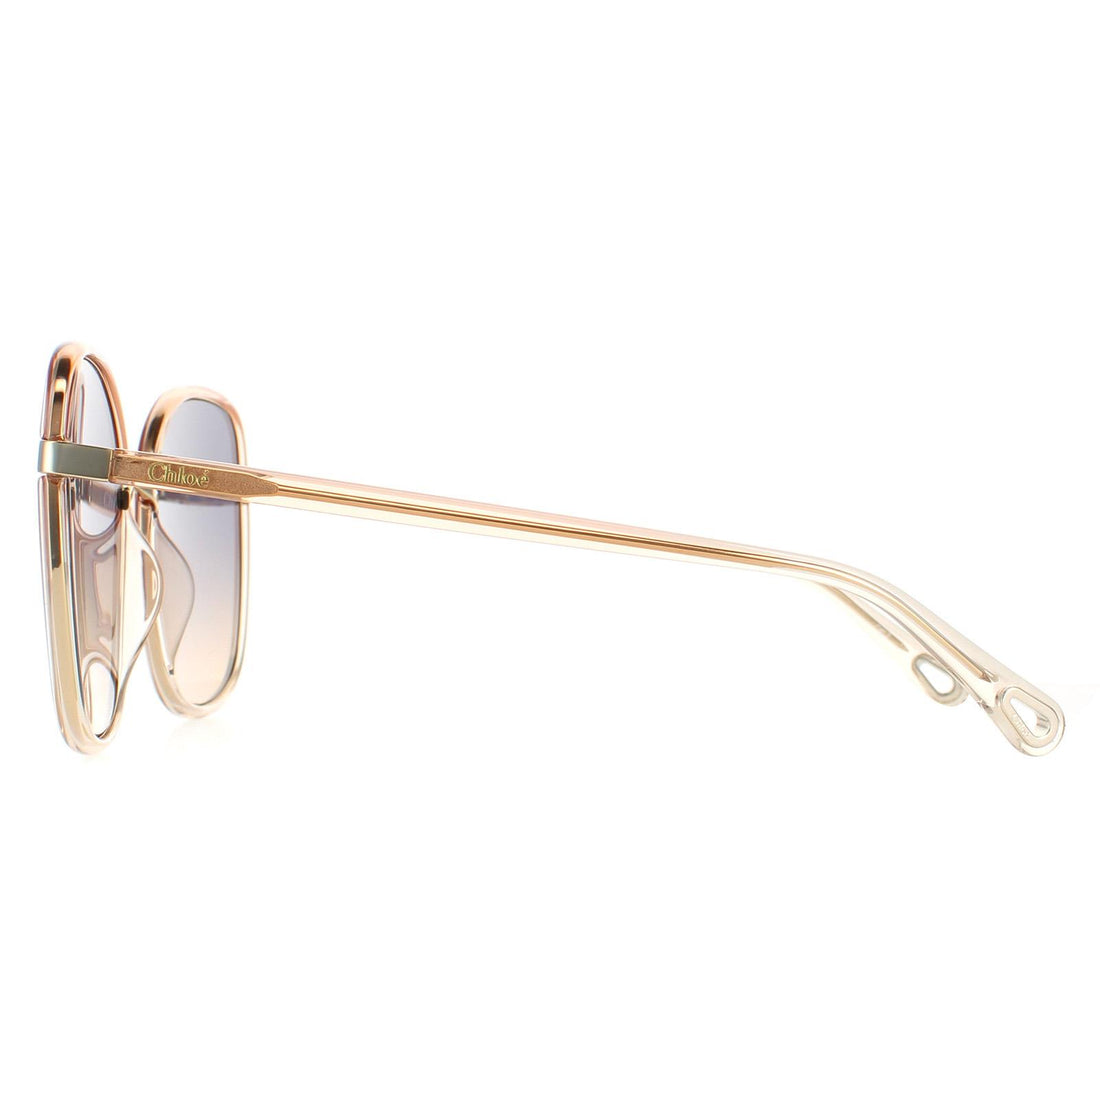 Chloe Sunglasses CH0031S Franky 004 Orange Crystal Fade and Gold Blue to Brown Gradient